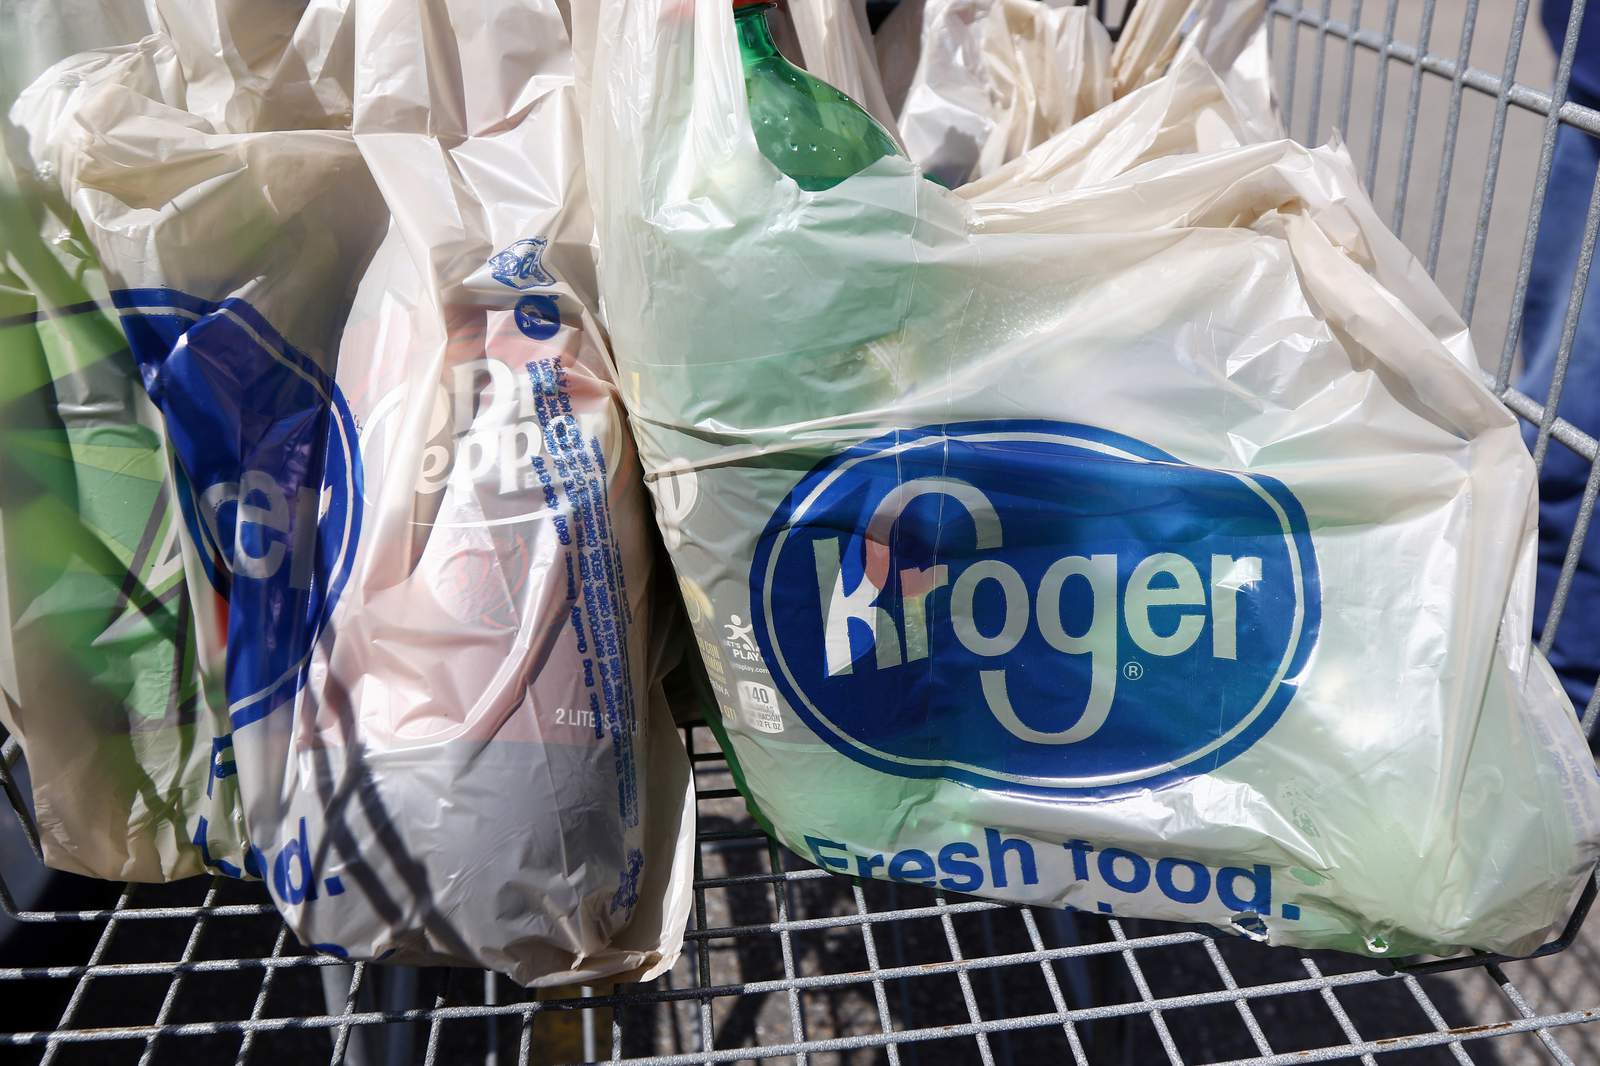 Kroger Pickup to accept SNAP benefits amid pandemic